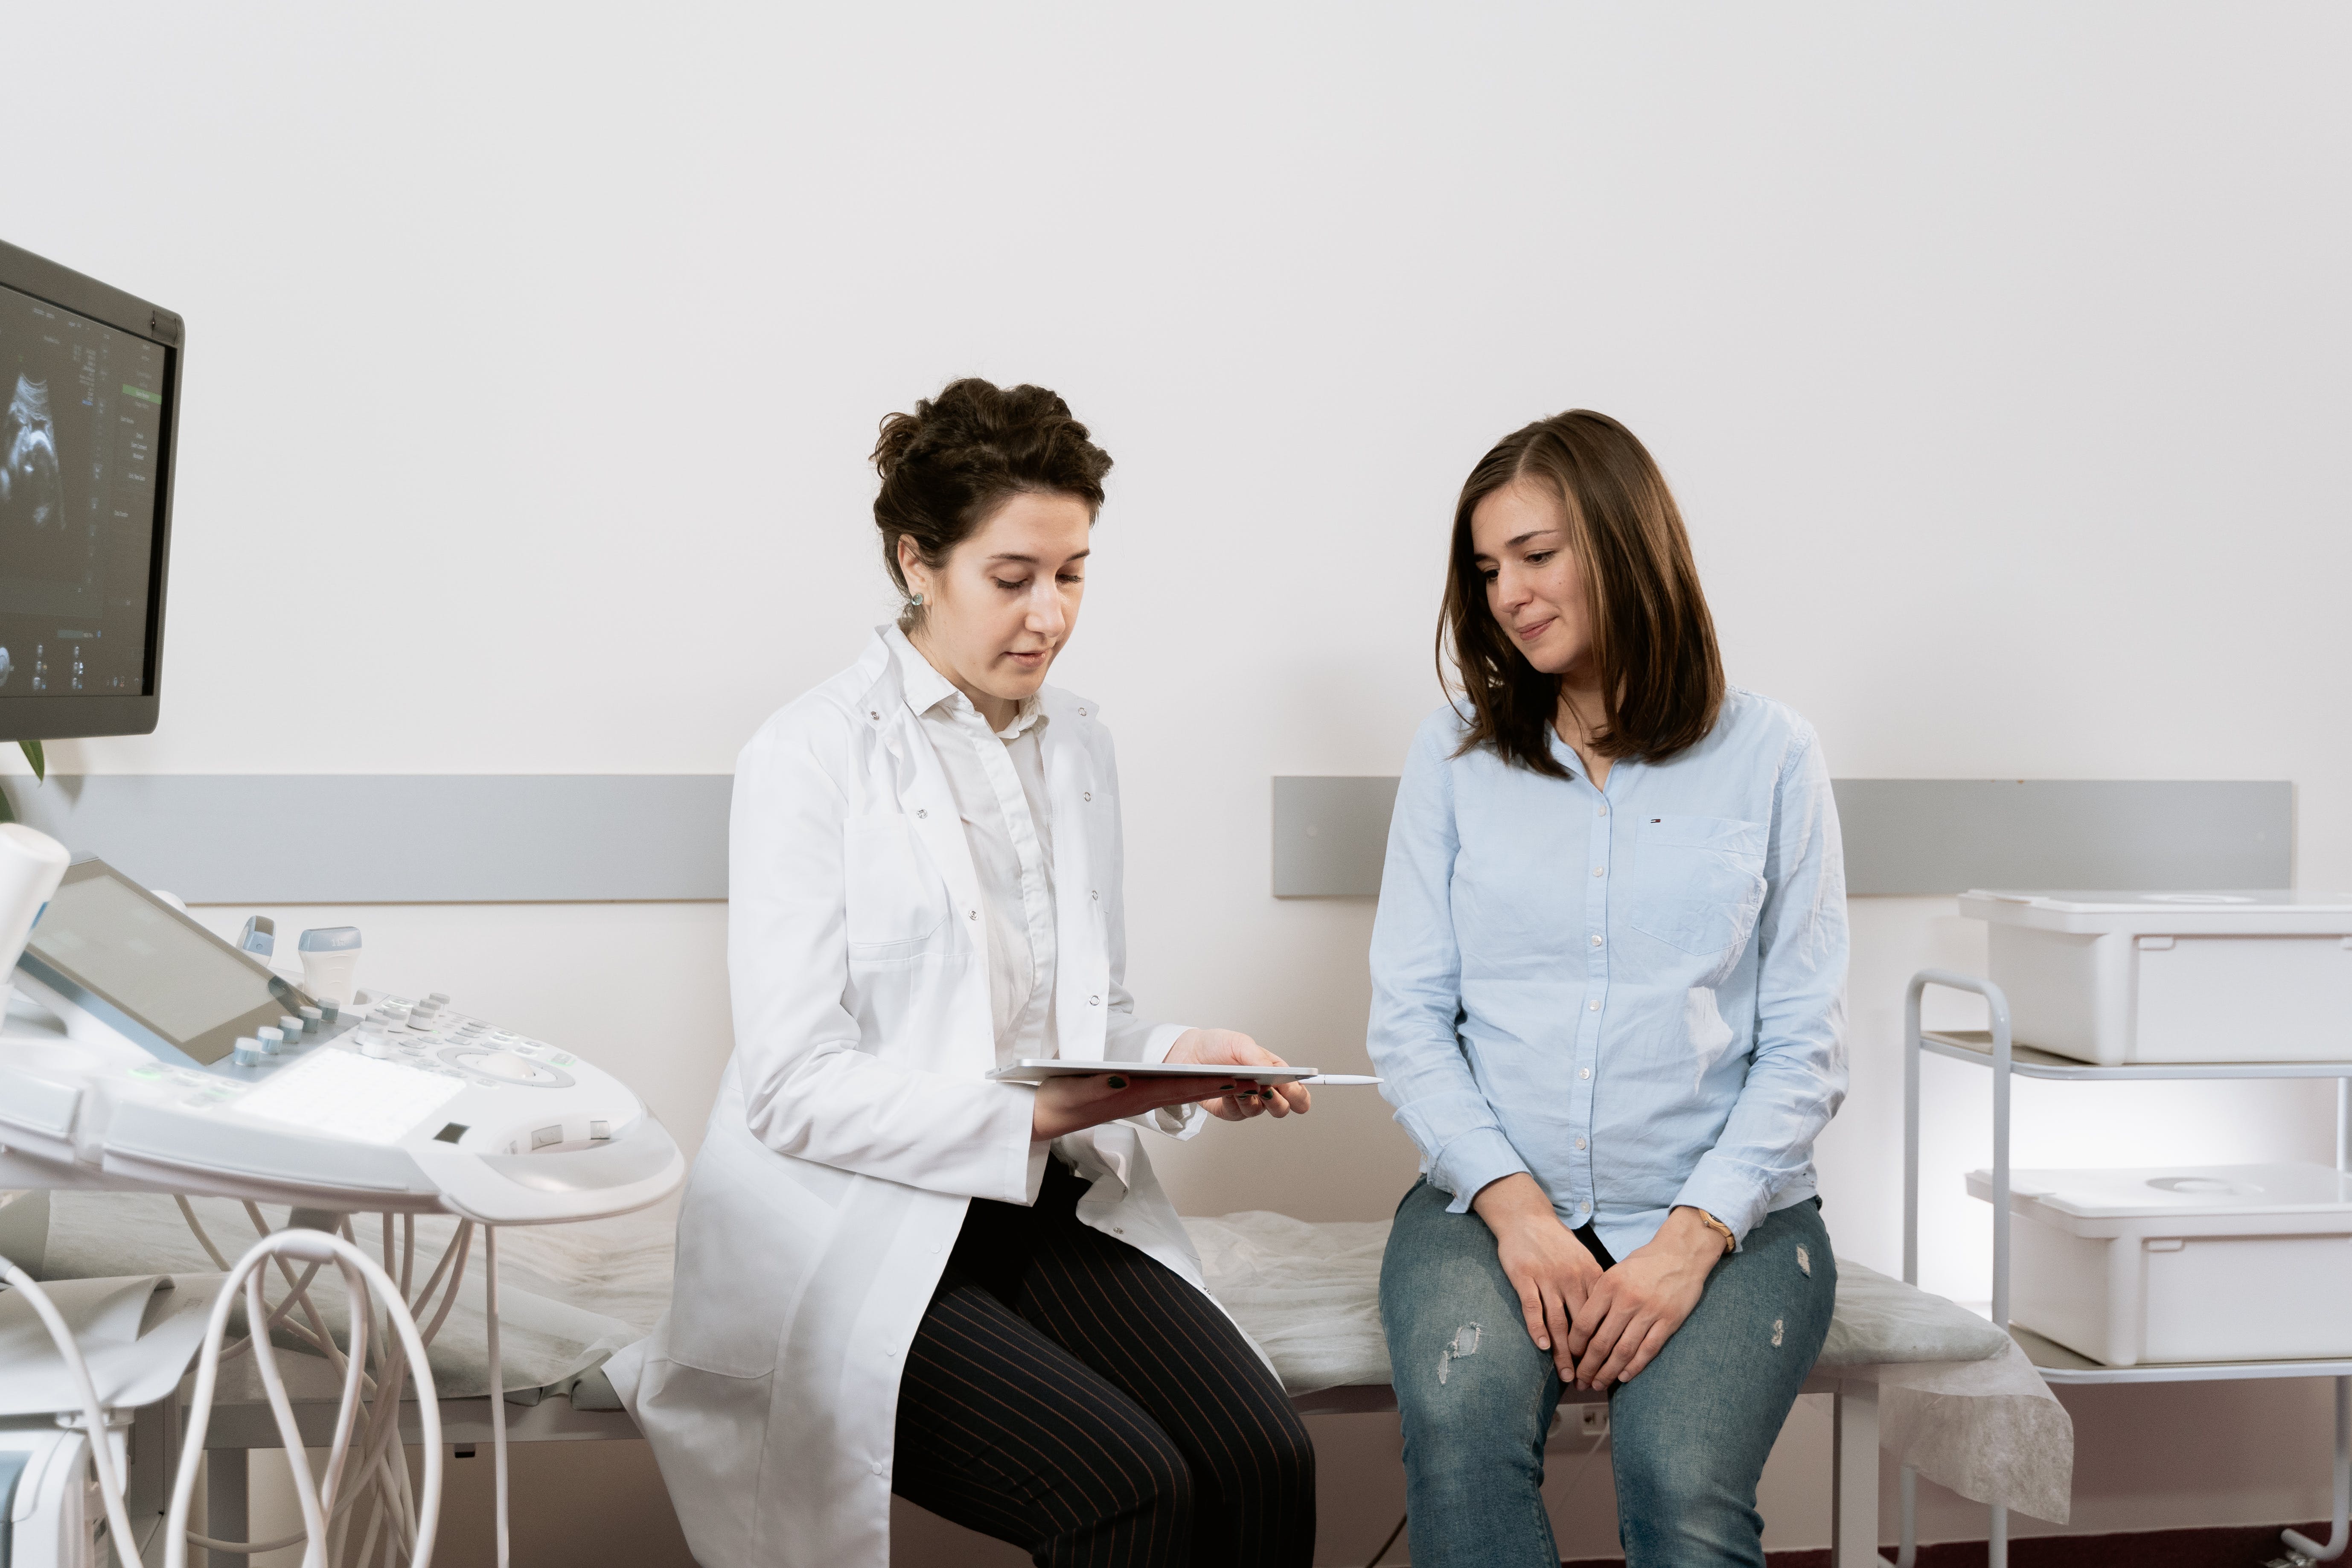 A pregnant woman having a consultation with a doctor. | Source: Pexels